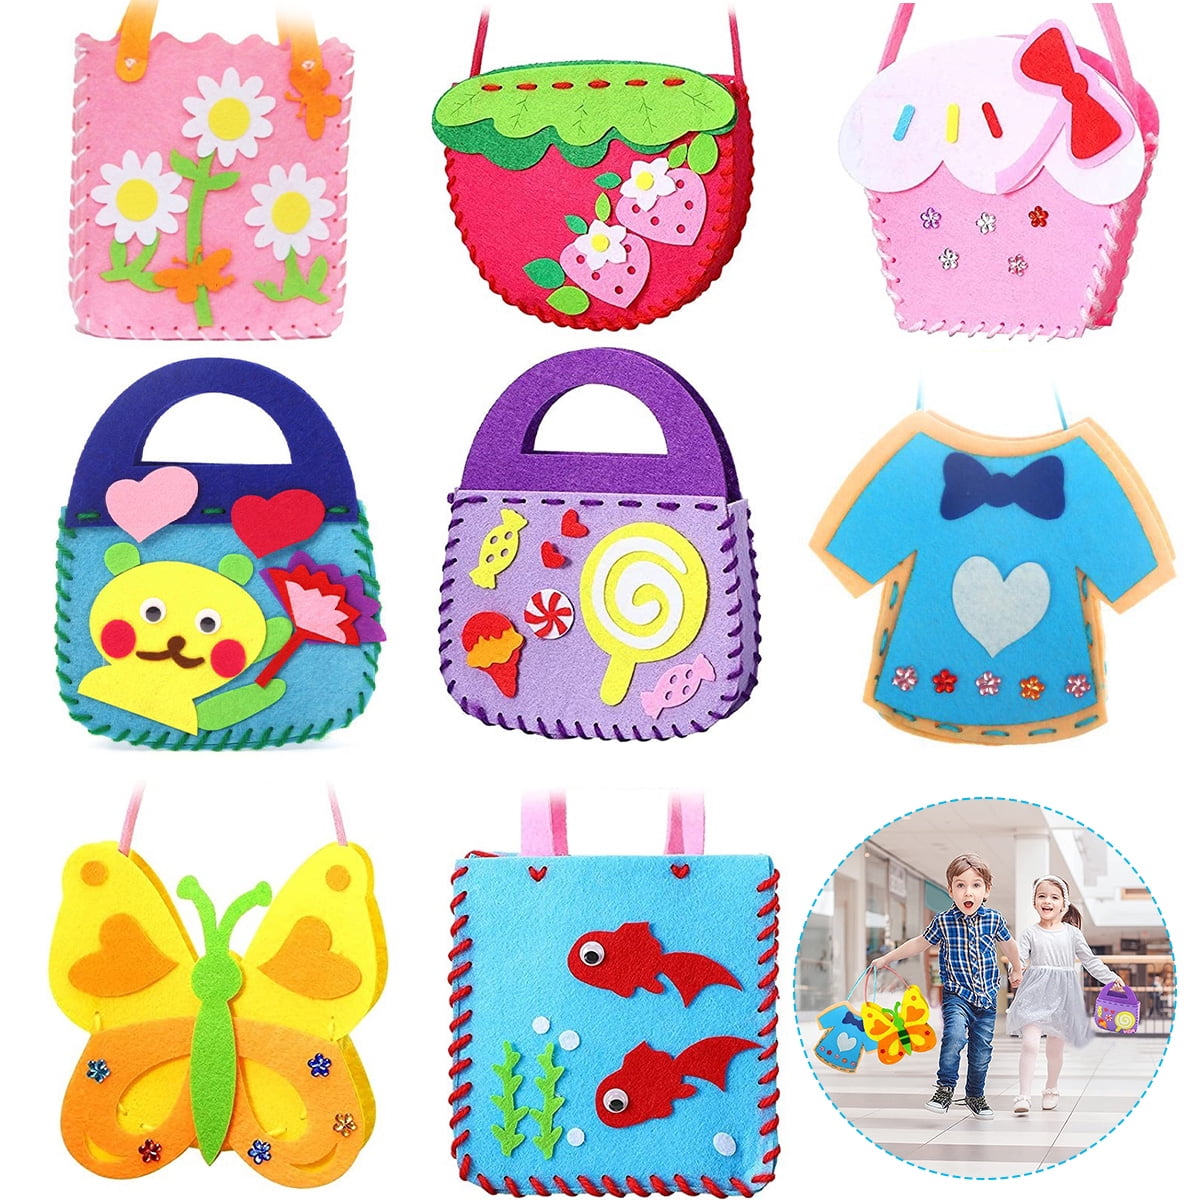 Girls Fashion Design Kids Sewing Craft Kit Creative Crafts Toys For Girls  To Stimulate Imagination DIY Arts And Crafts For Teen - AliExpress